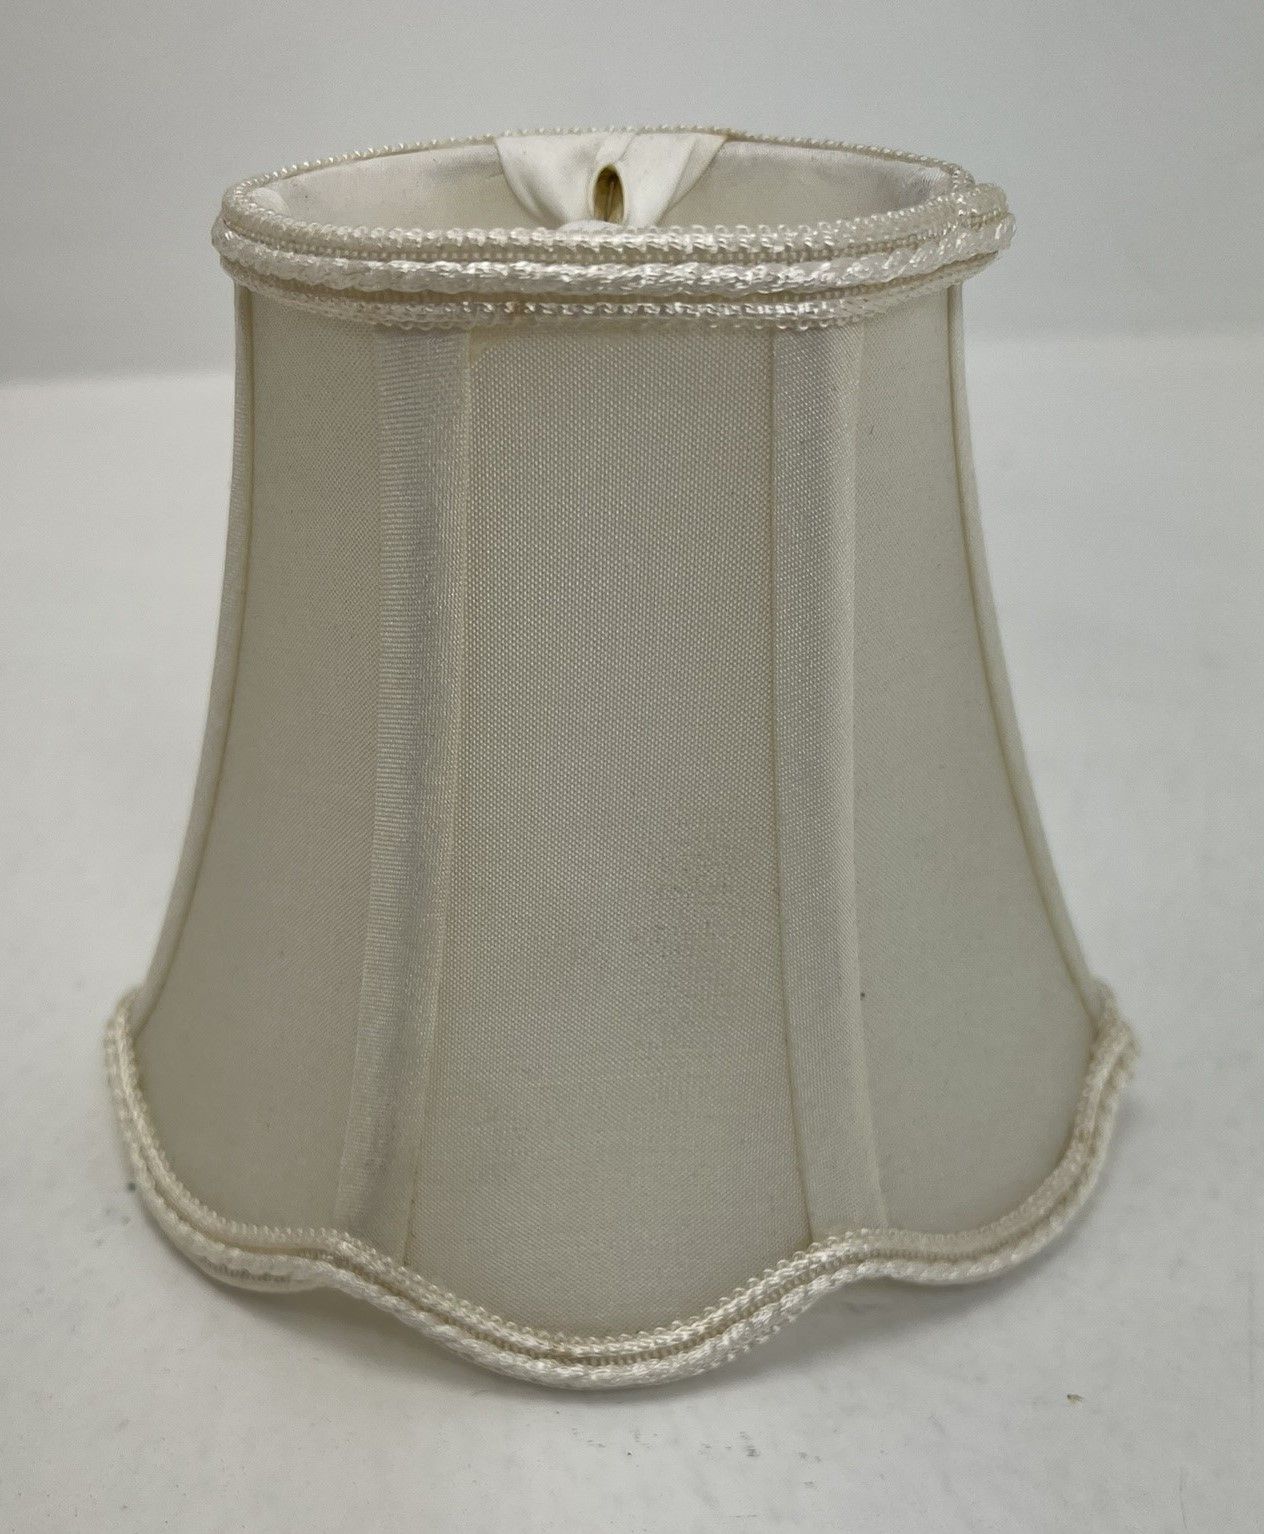 Uonlytech Drum Lamp Shades Large Lamp Shade, Scallop Bell Lamp